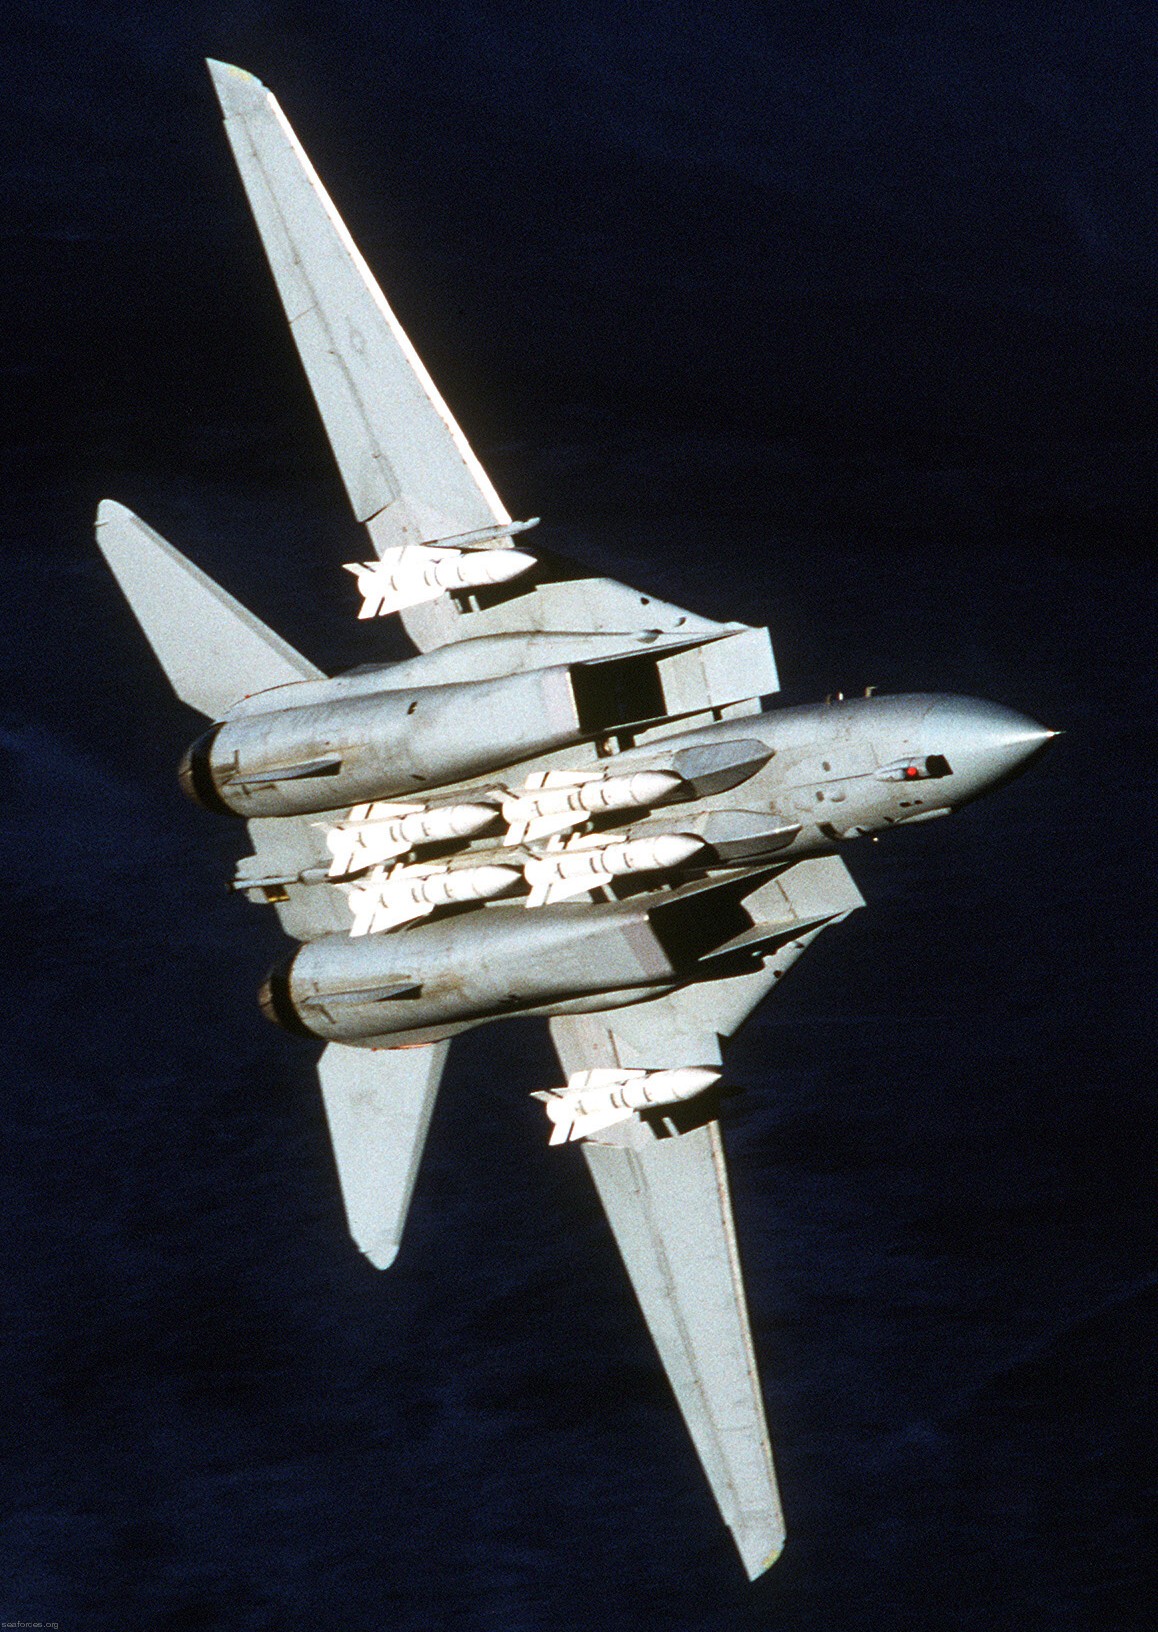 vf-211 fighting checkmates fighter squadron f-14a tomcat us navy carrier air wing cvw-9 uss nimitz cvn-68 43